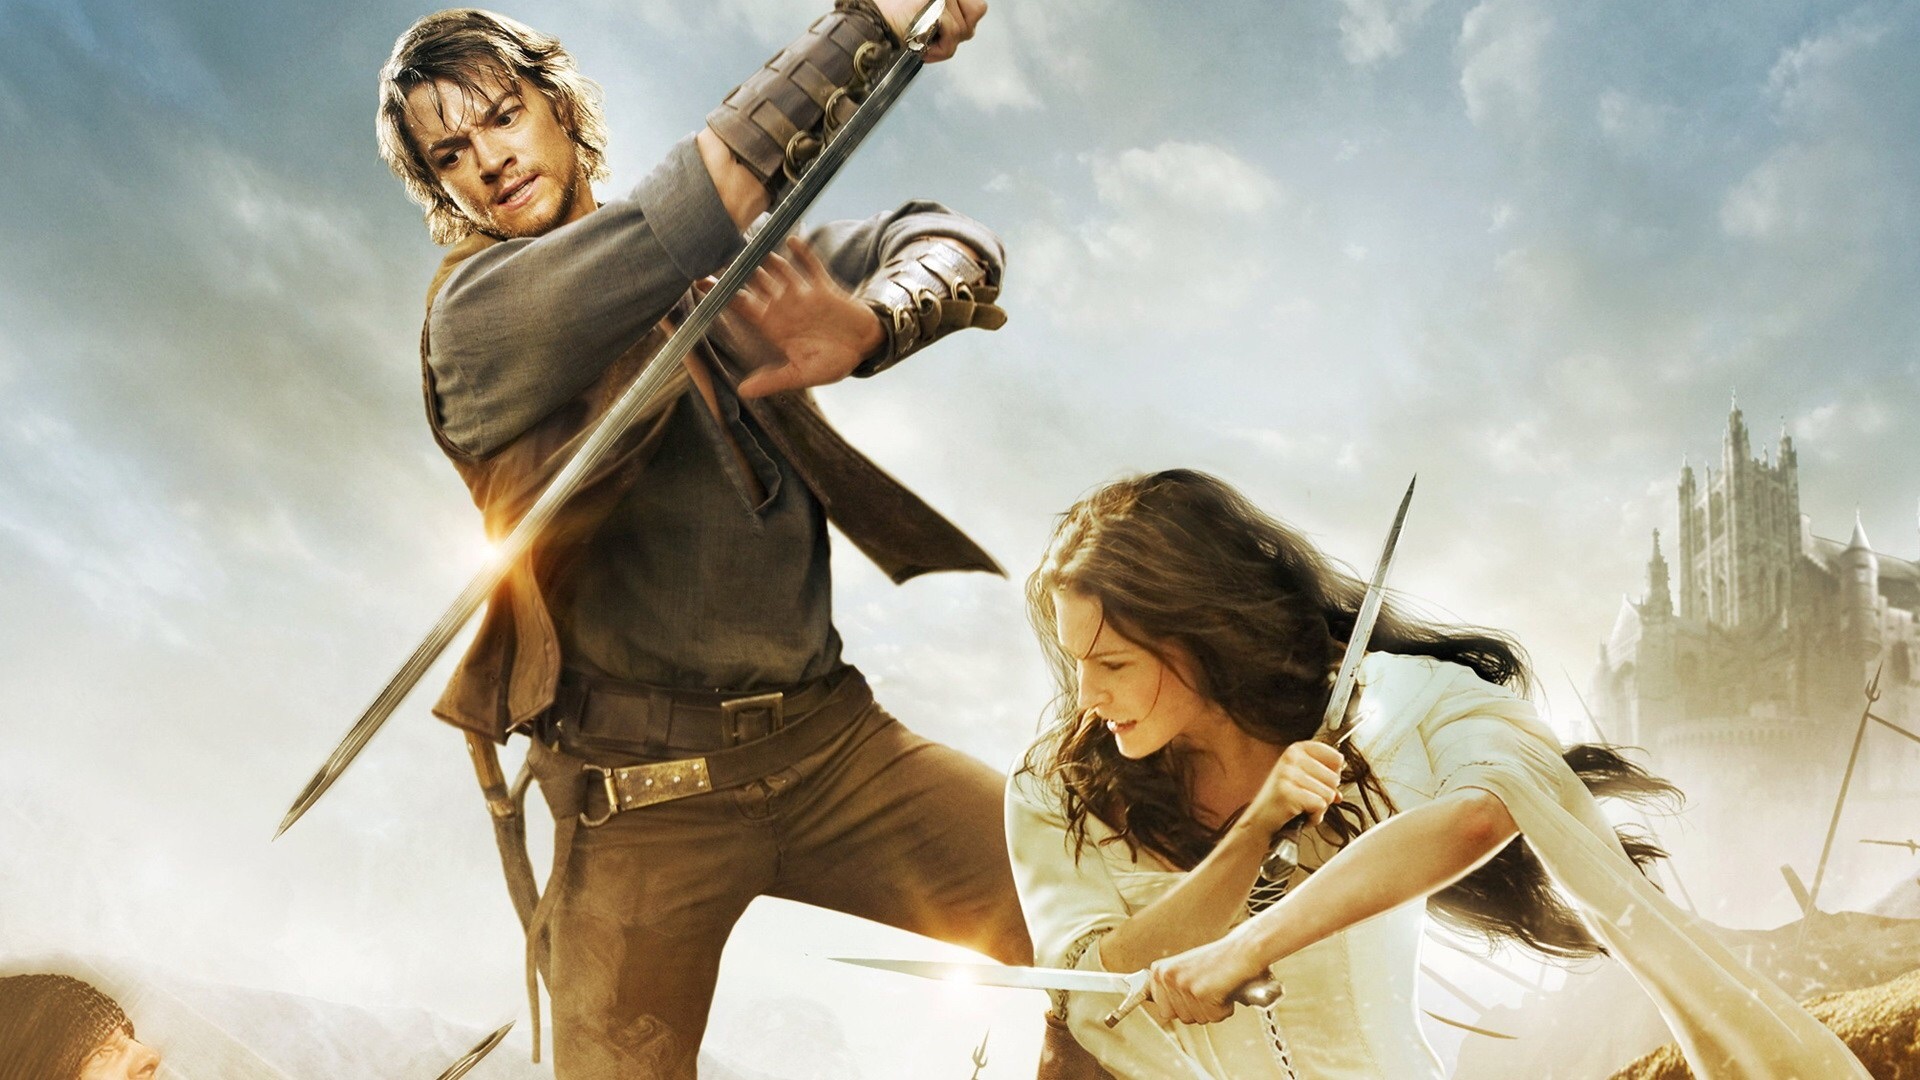 Legend of the Seeker (TV Series): Richard Cypher and Kahlan Amnell, The main characters in the action television show. 1920x1080 Full HD Background.